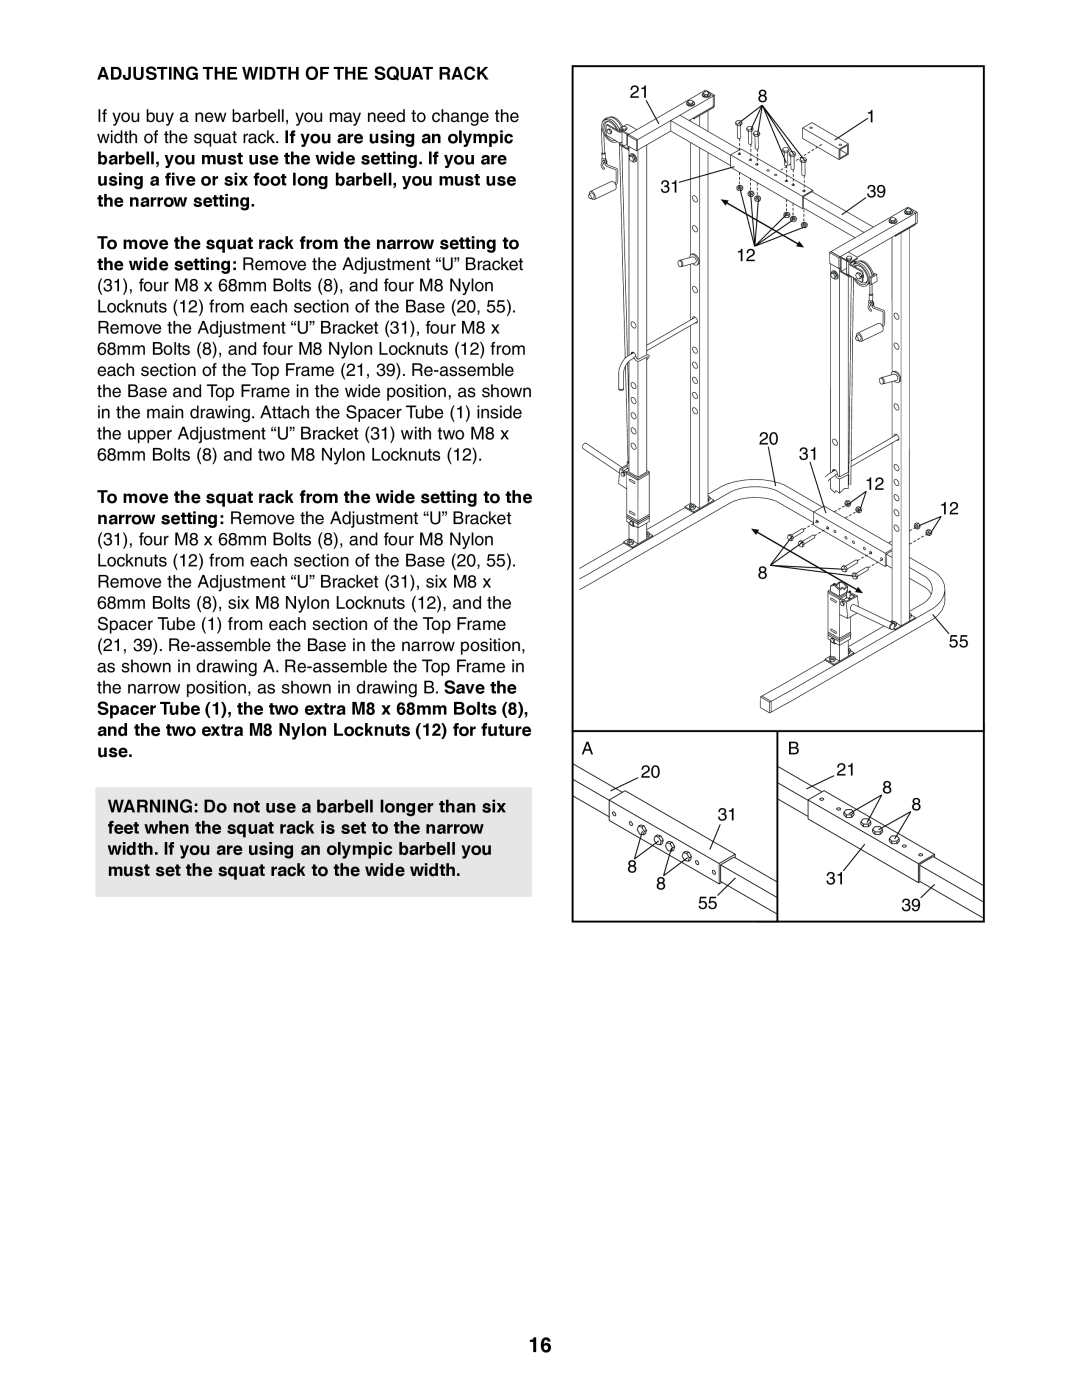 Weider 831.150470 user manual Adjusting The Width Of The Squat Rack 